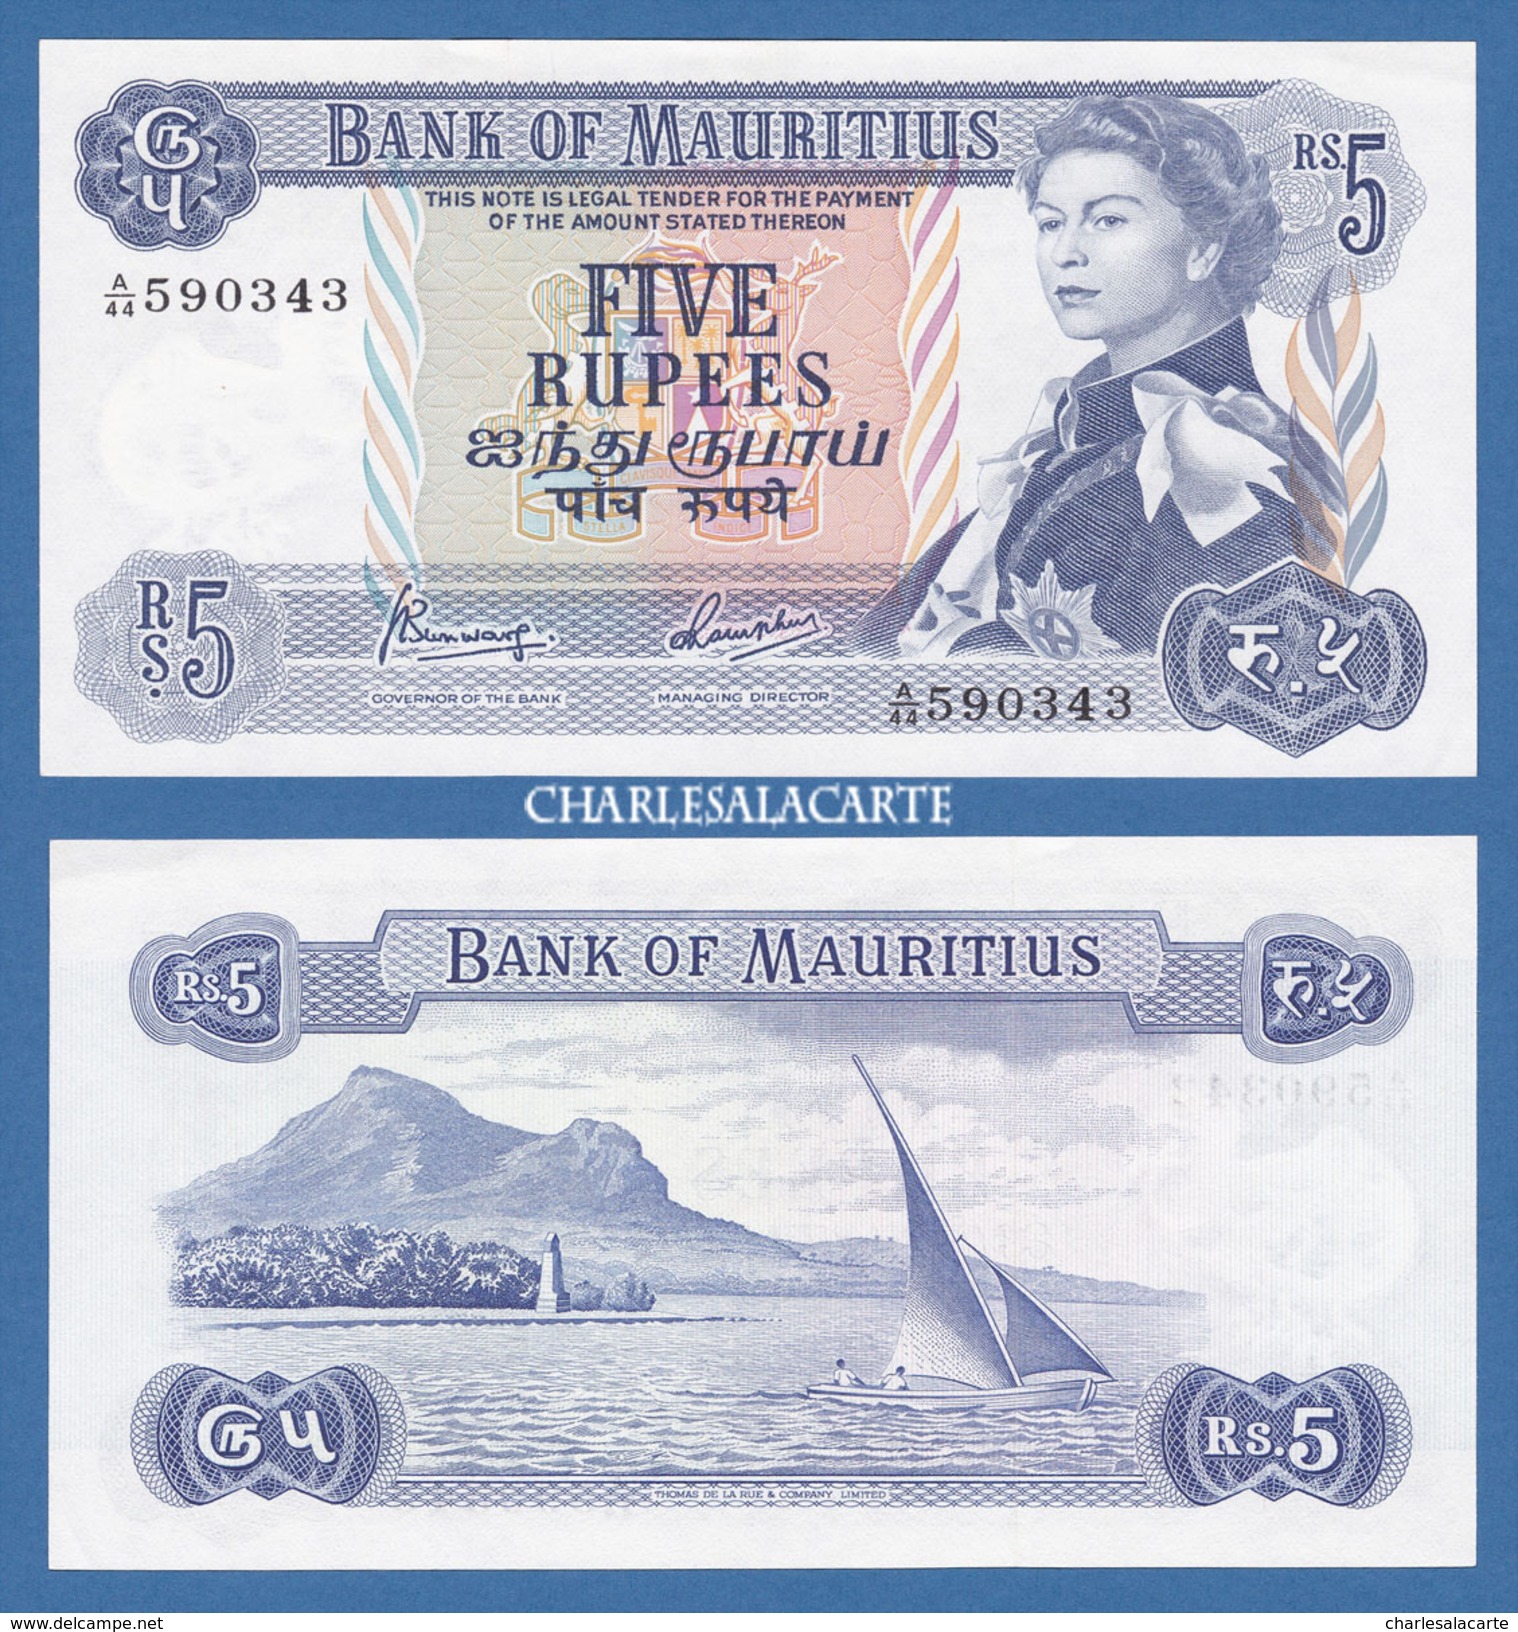 1967 MAURITIUS  5 RUPEES  Q.E. II  SAILBOAT 1ST. LANDING MONUMENT  KRAUSE 30c  EXCELLENT ALMOST UNC. CONDITION - Maurice